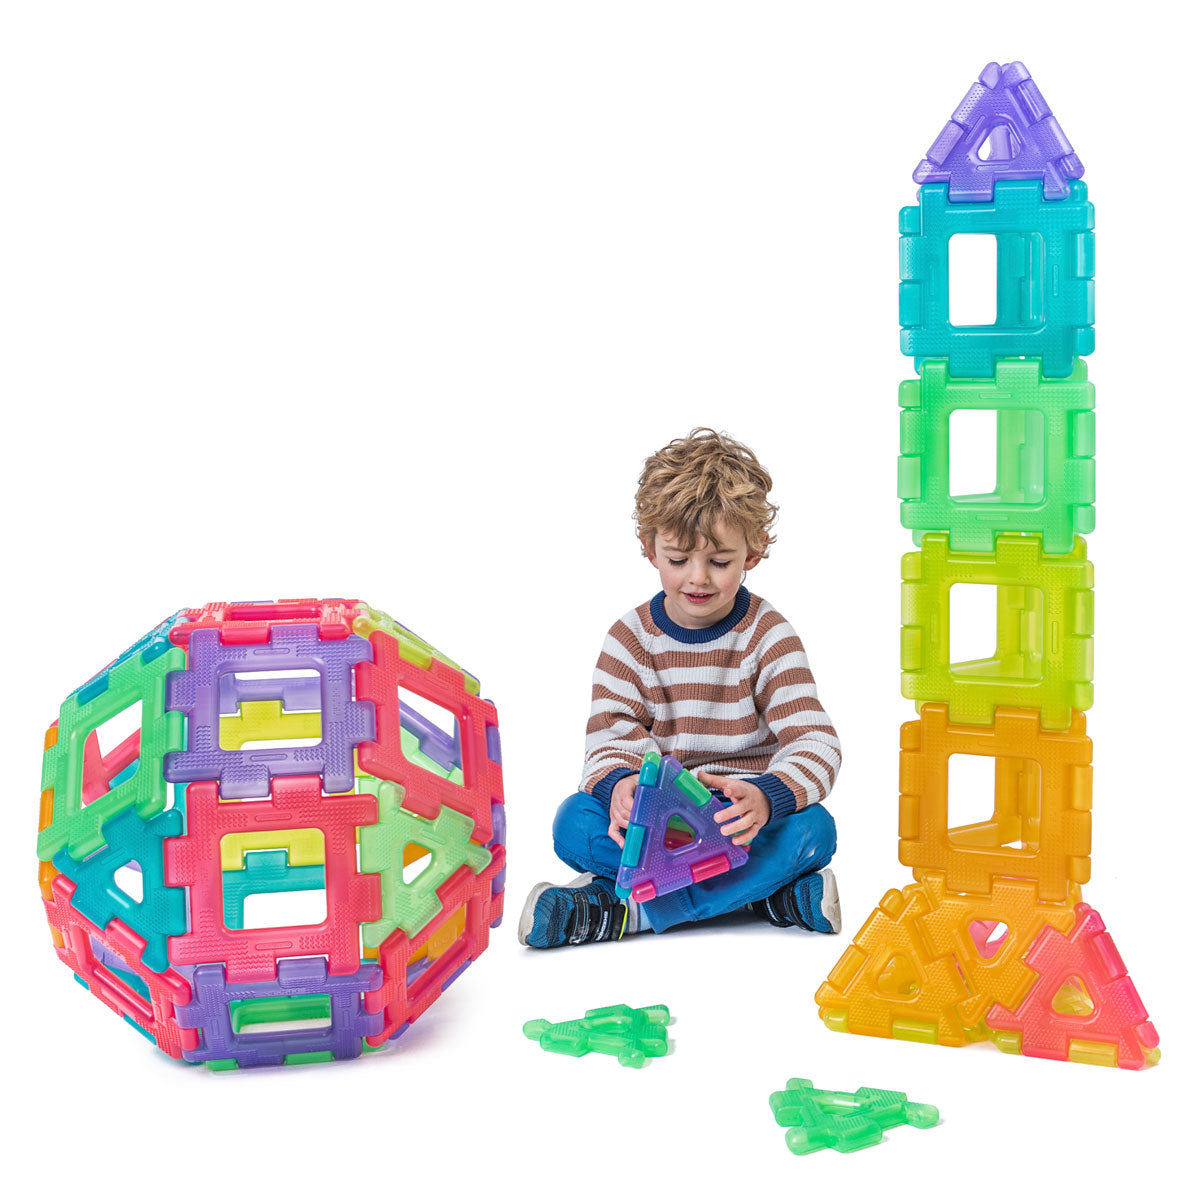 Translucent Giant Polydron Set-60 Pieces, Create colourful constructions with Translucent Giant Polydron! This 60-piece set contains equal numbers of squares and triangles in 6 stunning colours. The Translucent colours add a whole new dimension to play when using the pieces outdoors in natural sunlight or with a light source. Improve fine and gross motor skills through construction play. The Translucent Giant Polydron Set-60 Pieces set is suitable for both indoor and outdoor use. The large, chunky pieces ar